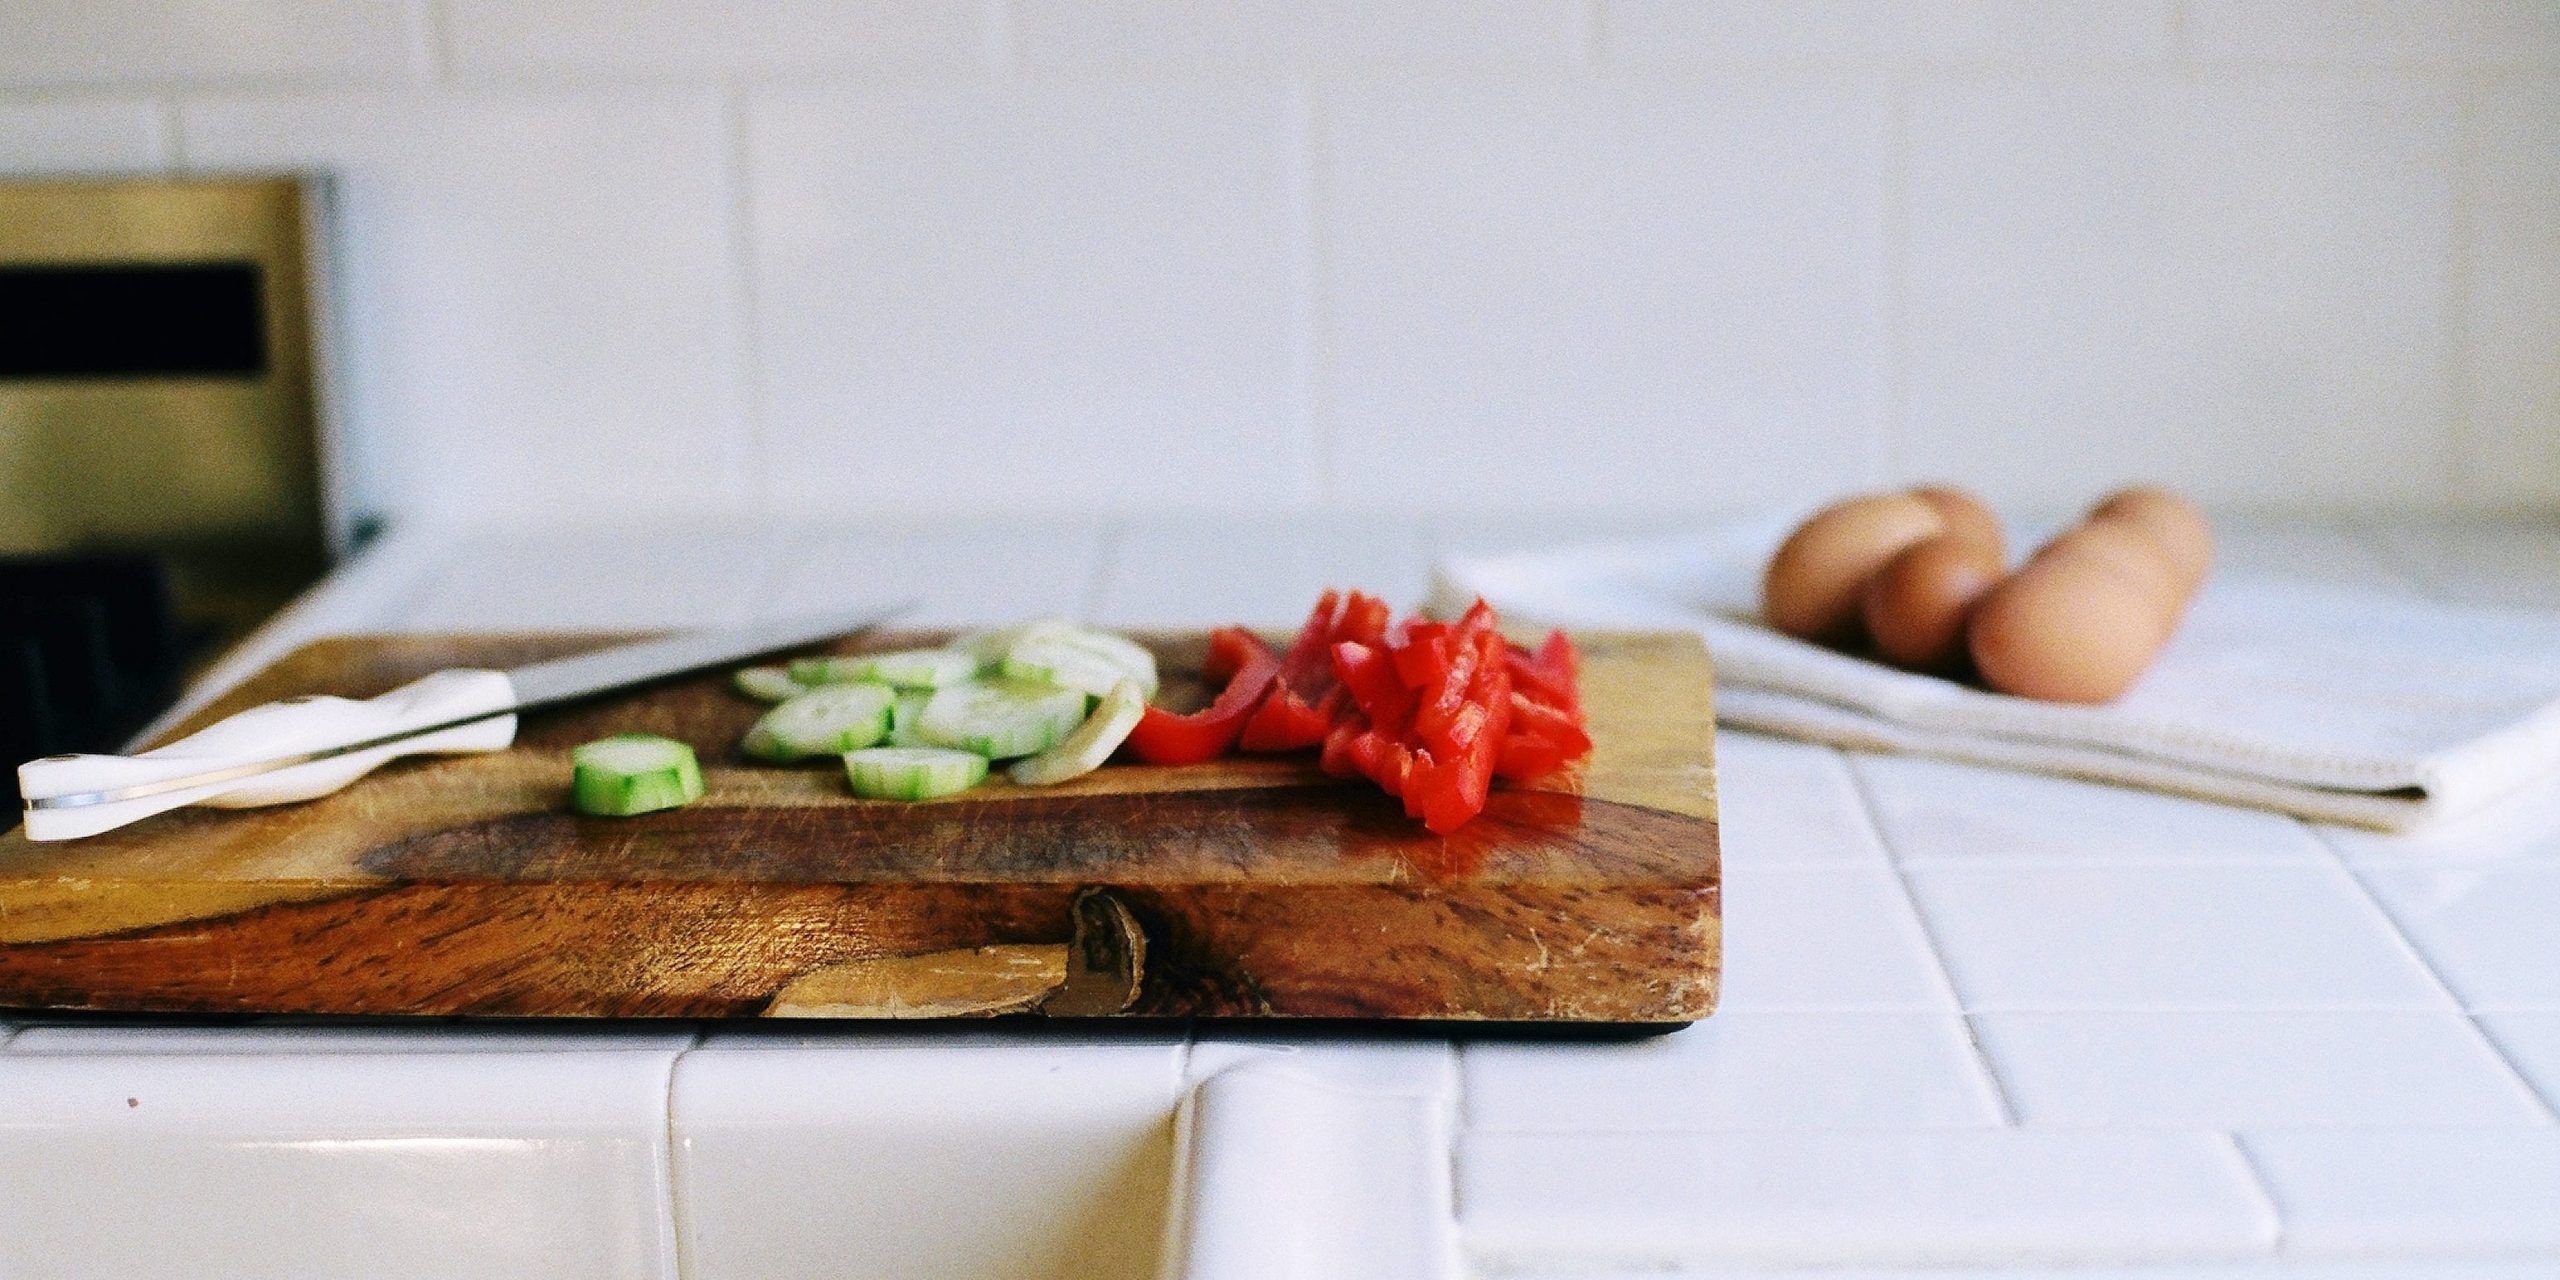 Frontal view of a wood cutting board with vegetables on top and some background styling